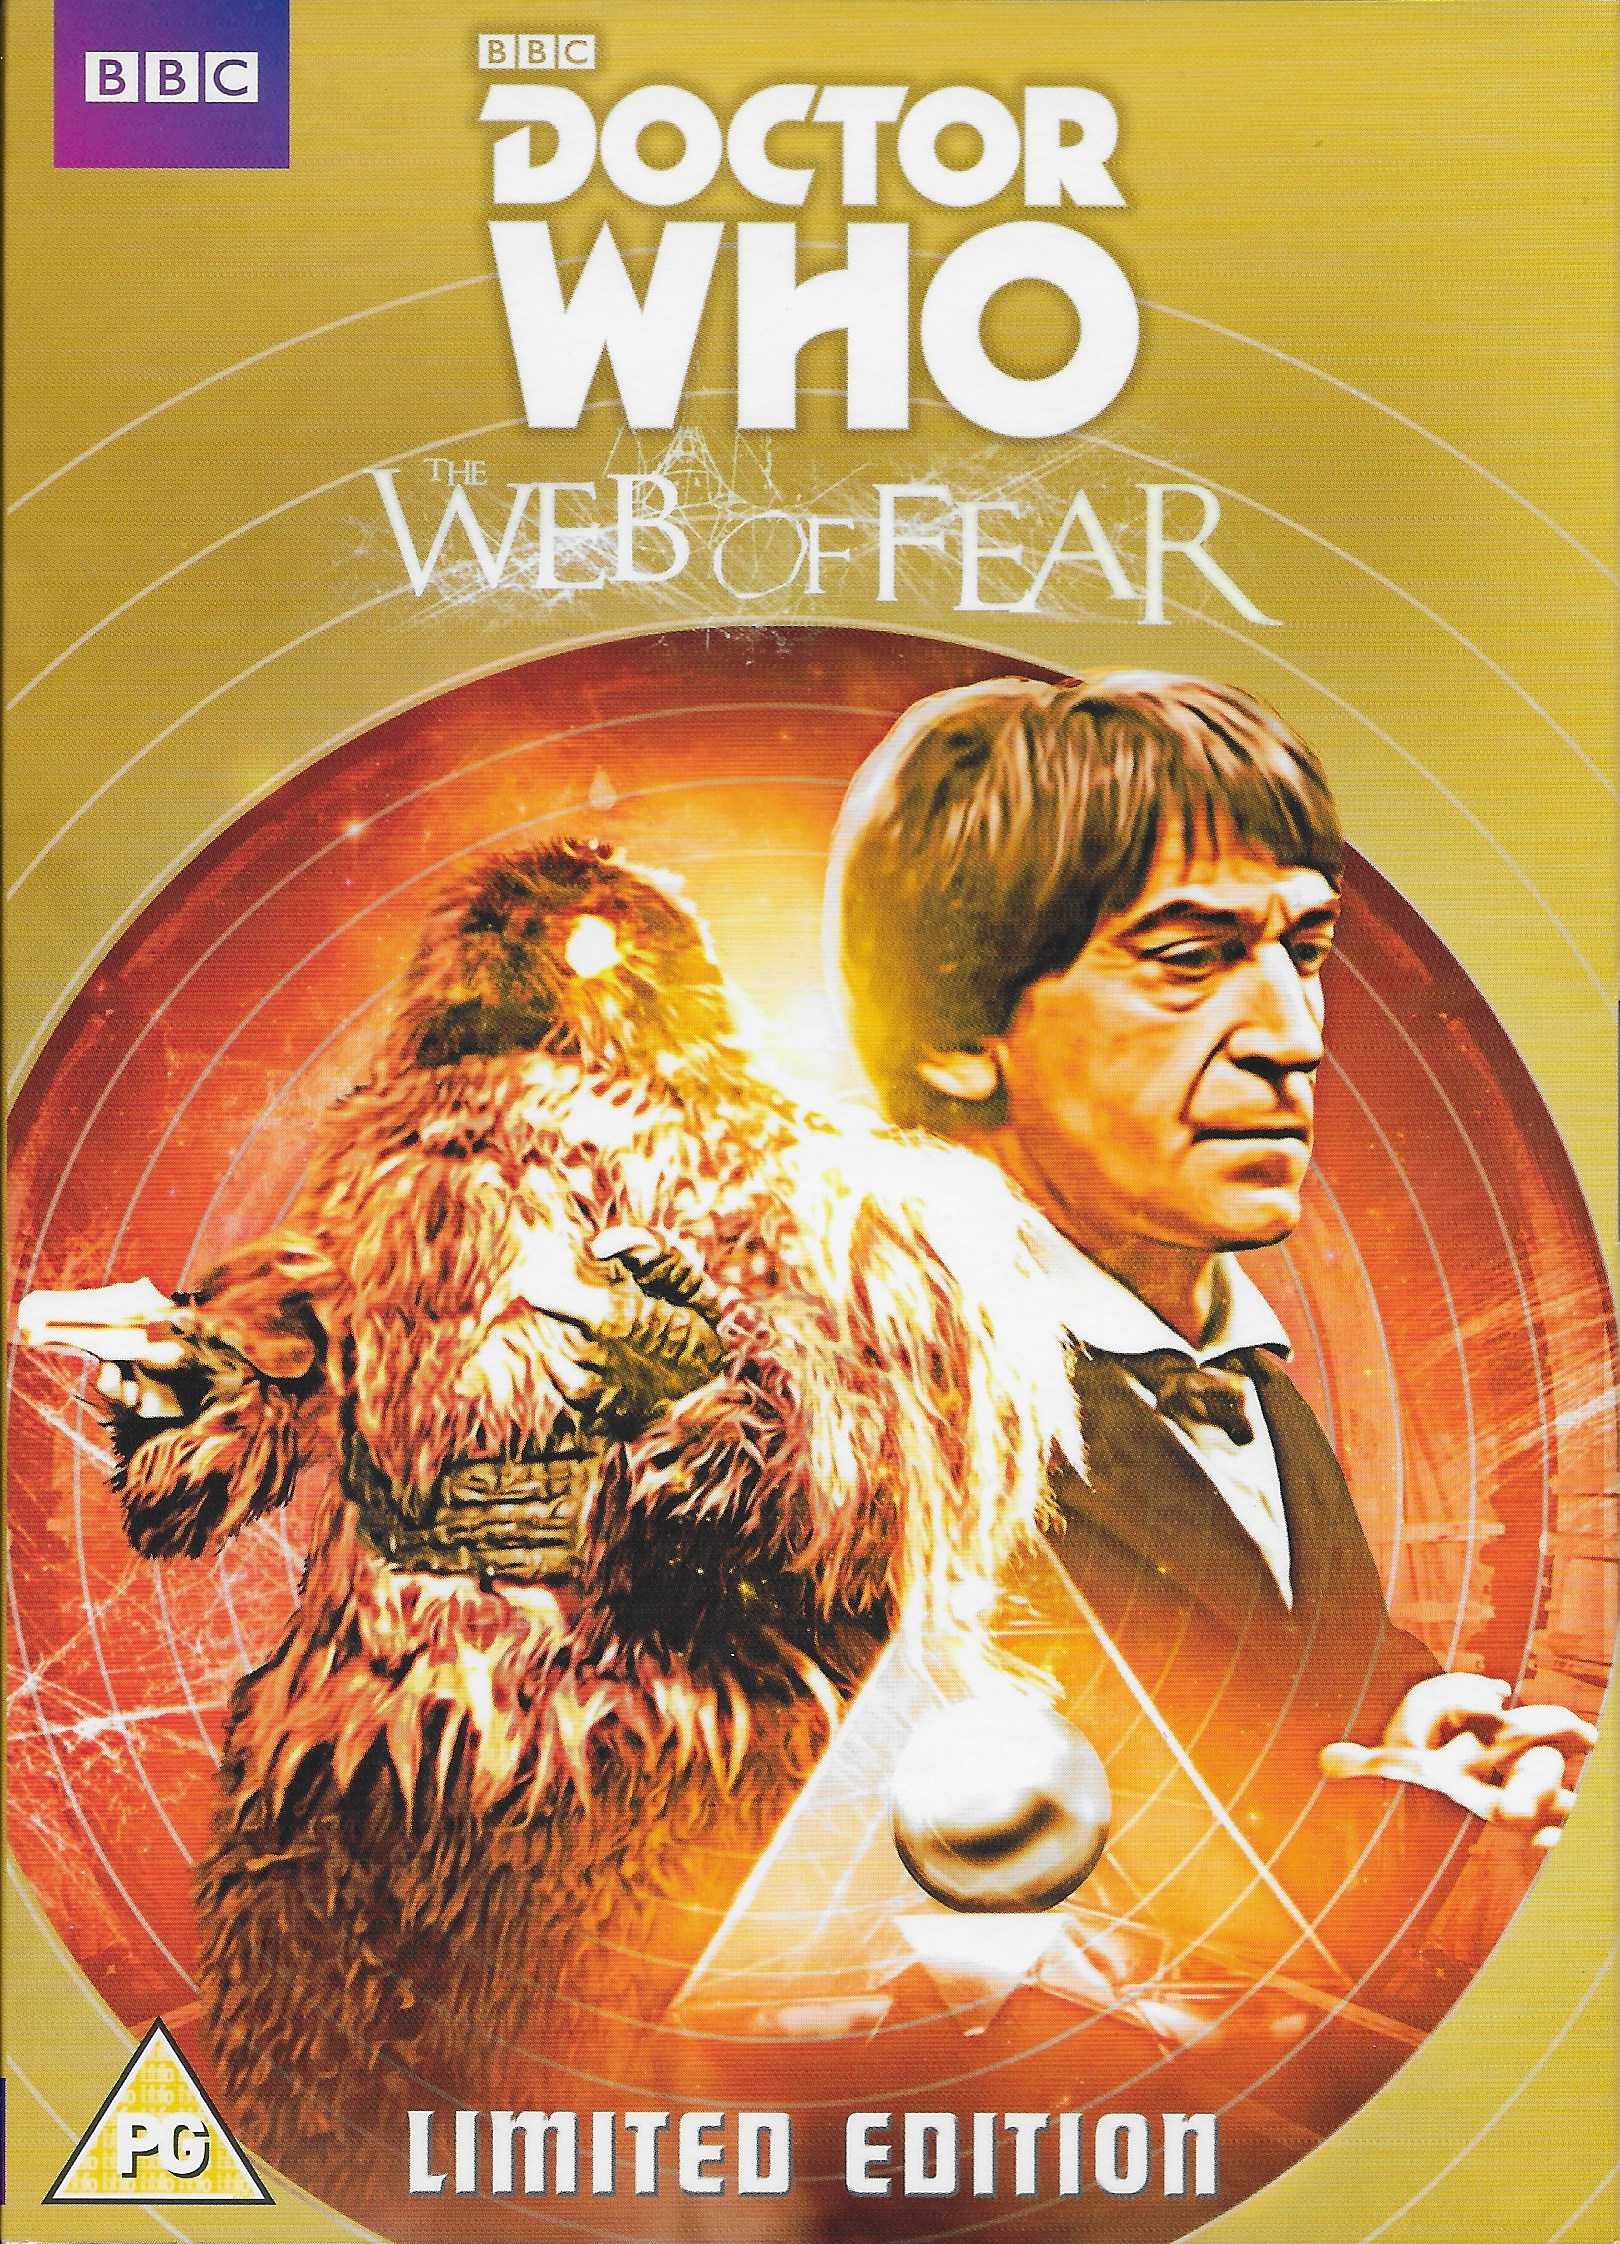 Picture of BBCDVD 3867 Doctor Who - The web of fear (Limited edition) by artist Mervyn Haisman / Henry Lincoln from the BBC dvds - Records and Tapes library